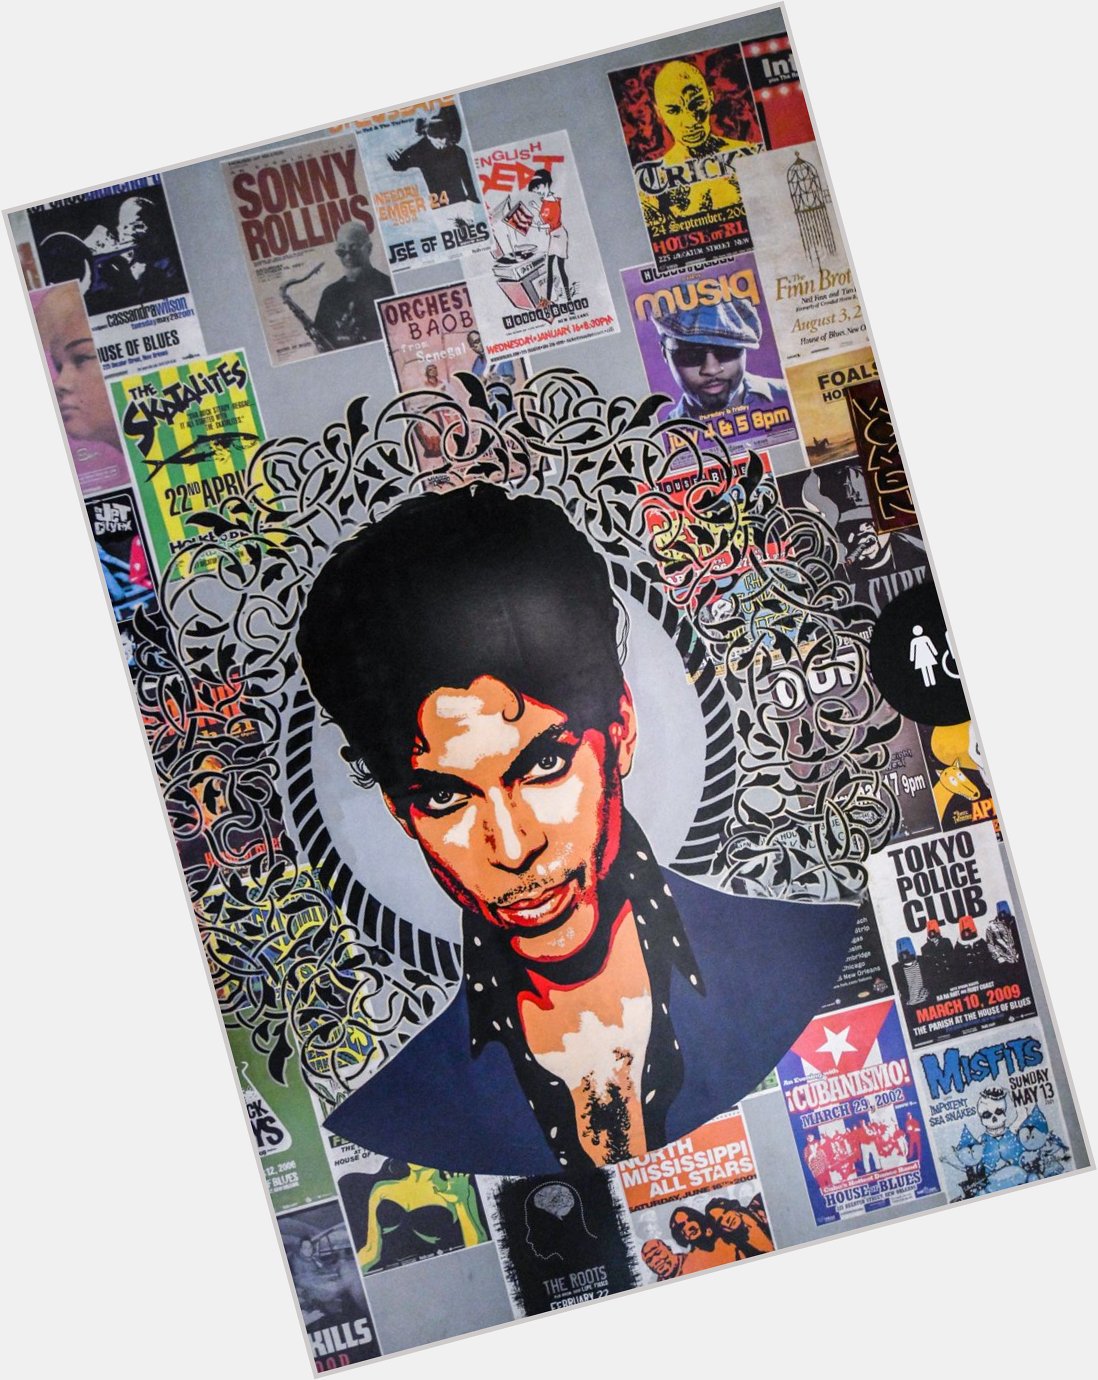 Happy Birthday to the legendary, Prince Check out this mural from our sister venue 